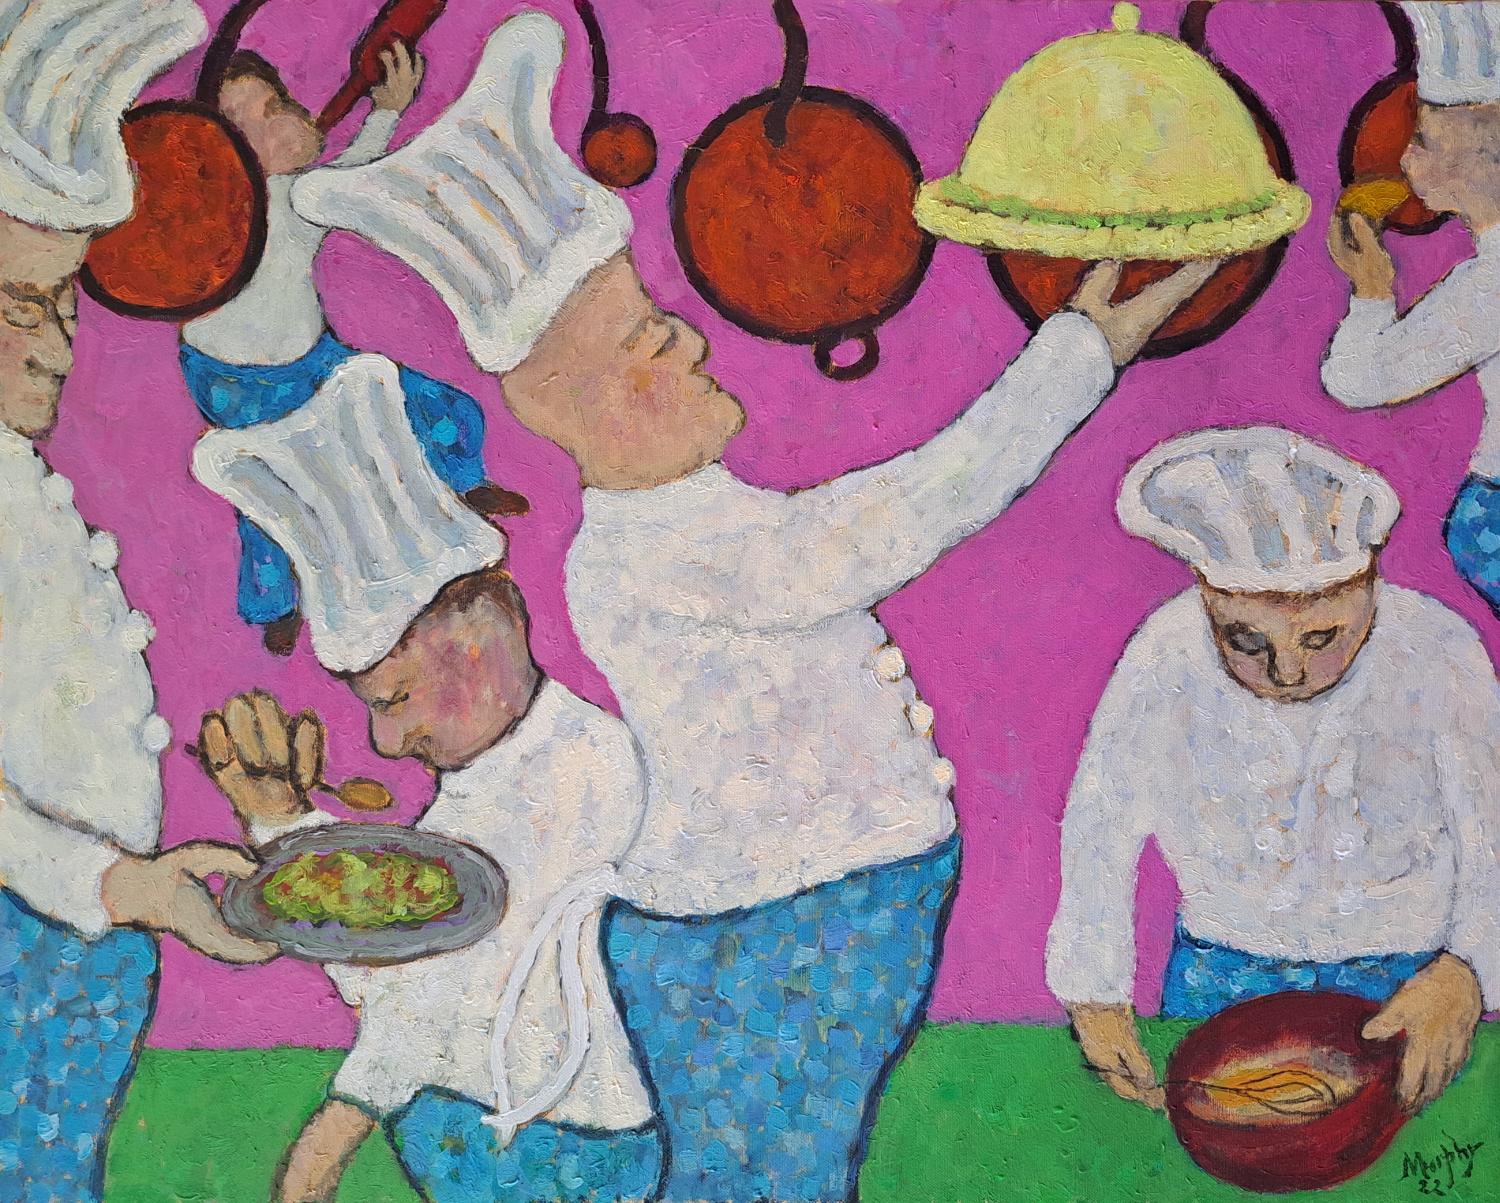 The-Chefs-81-x-65-cm-oil-on-canvas-web